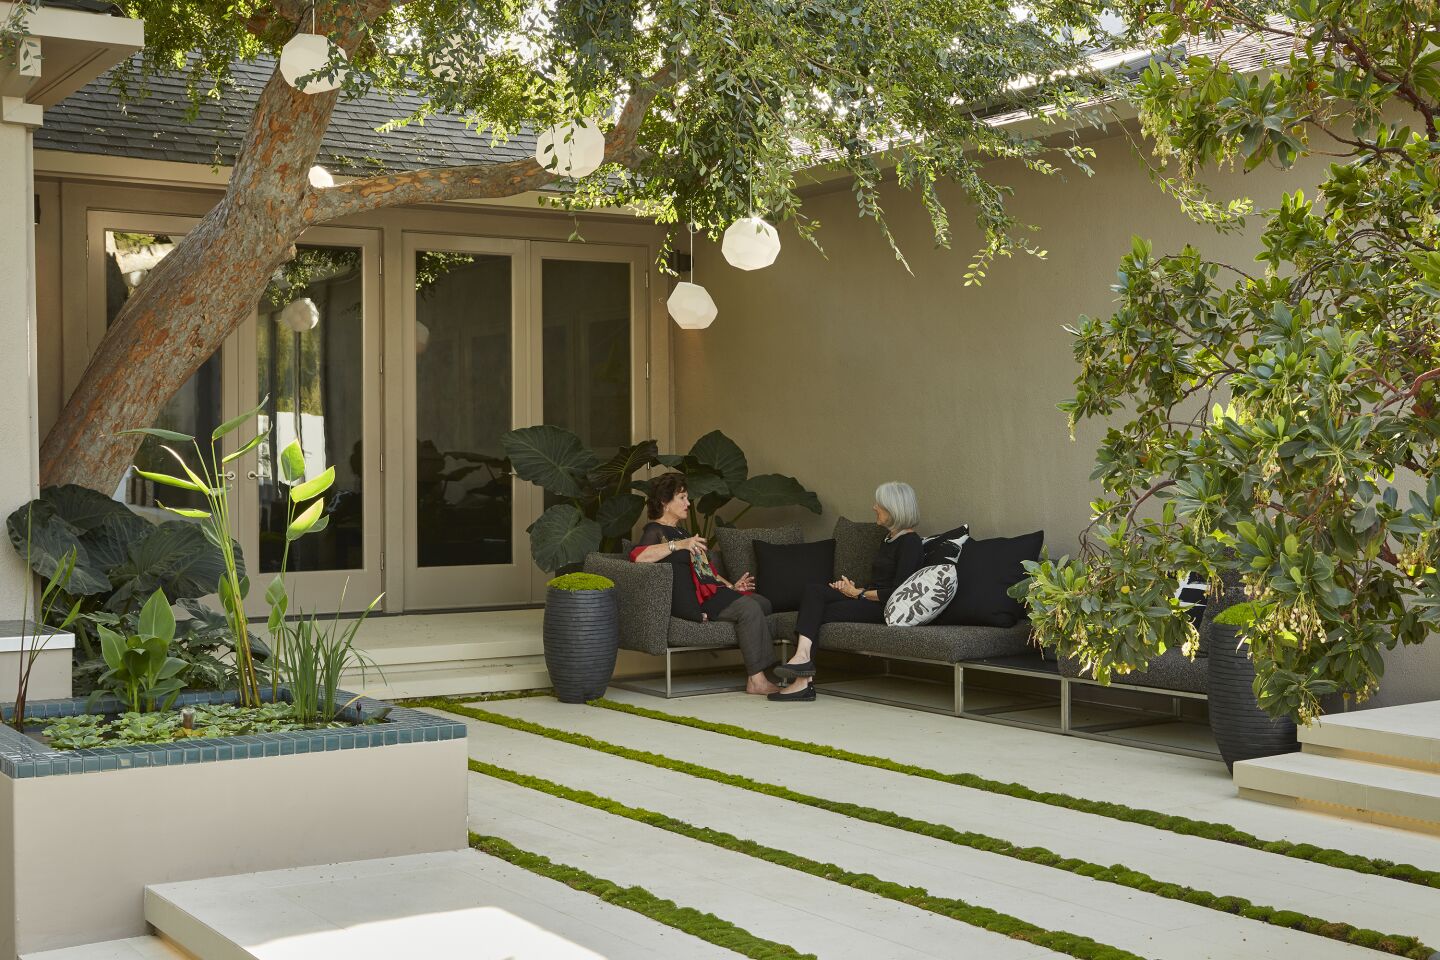 A conversation area sits in dappled sunlight under an old Chinese elm tree. Ground cover gaps in the paving allow air and water to reach the tree's roots.